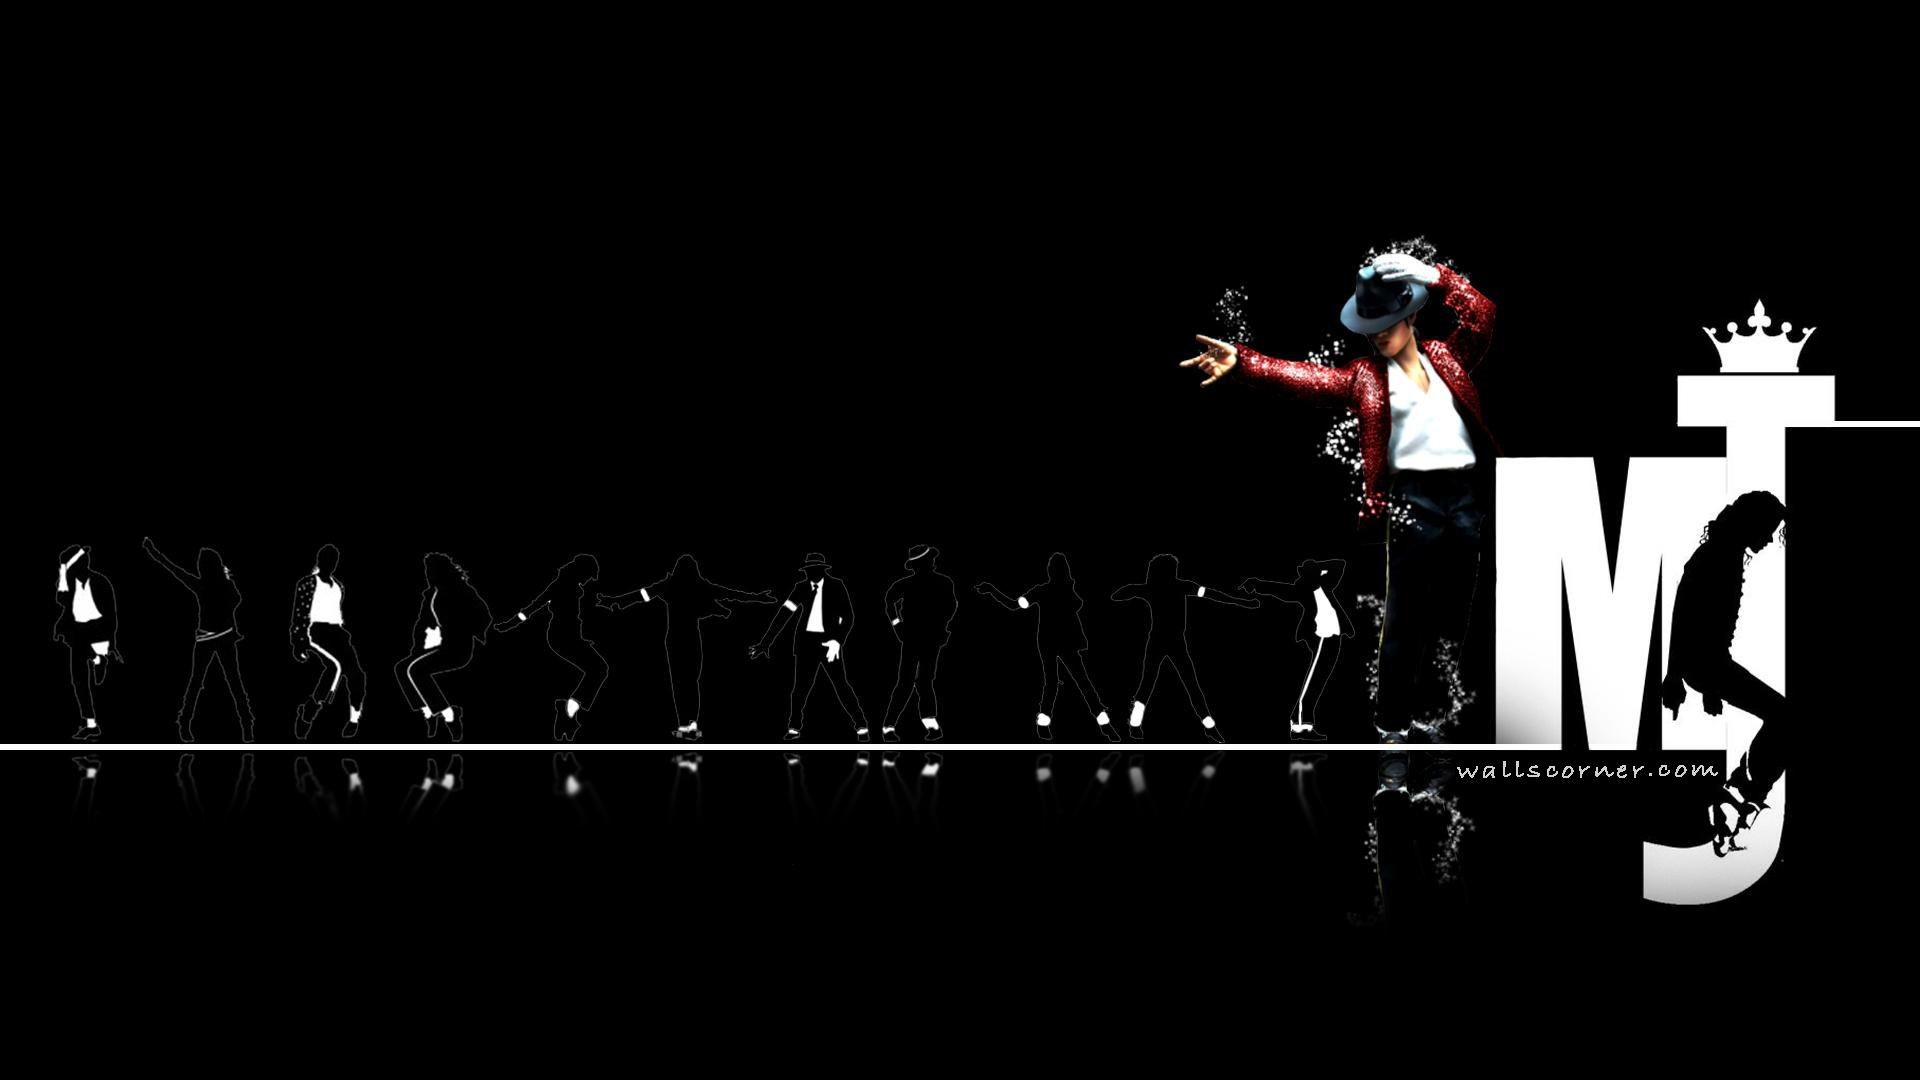 1920x1080 Gadgets Images of Michael Jackson by Marge Buckle.  0.072 MB. Michael  Jackson